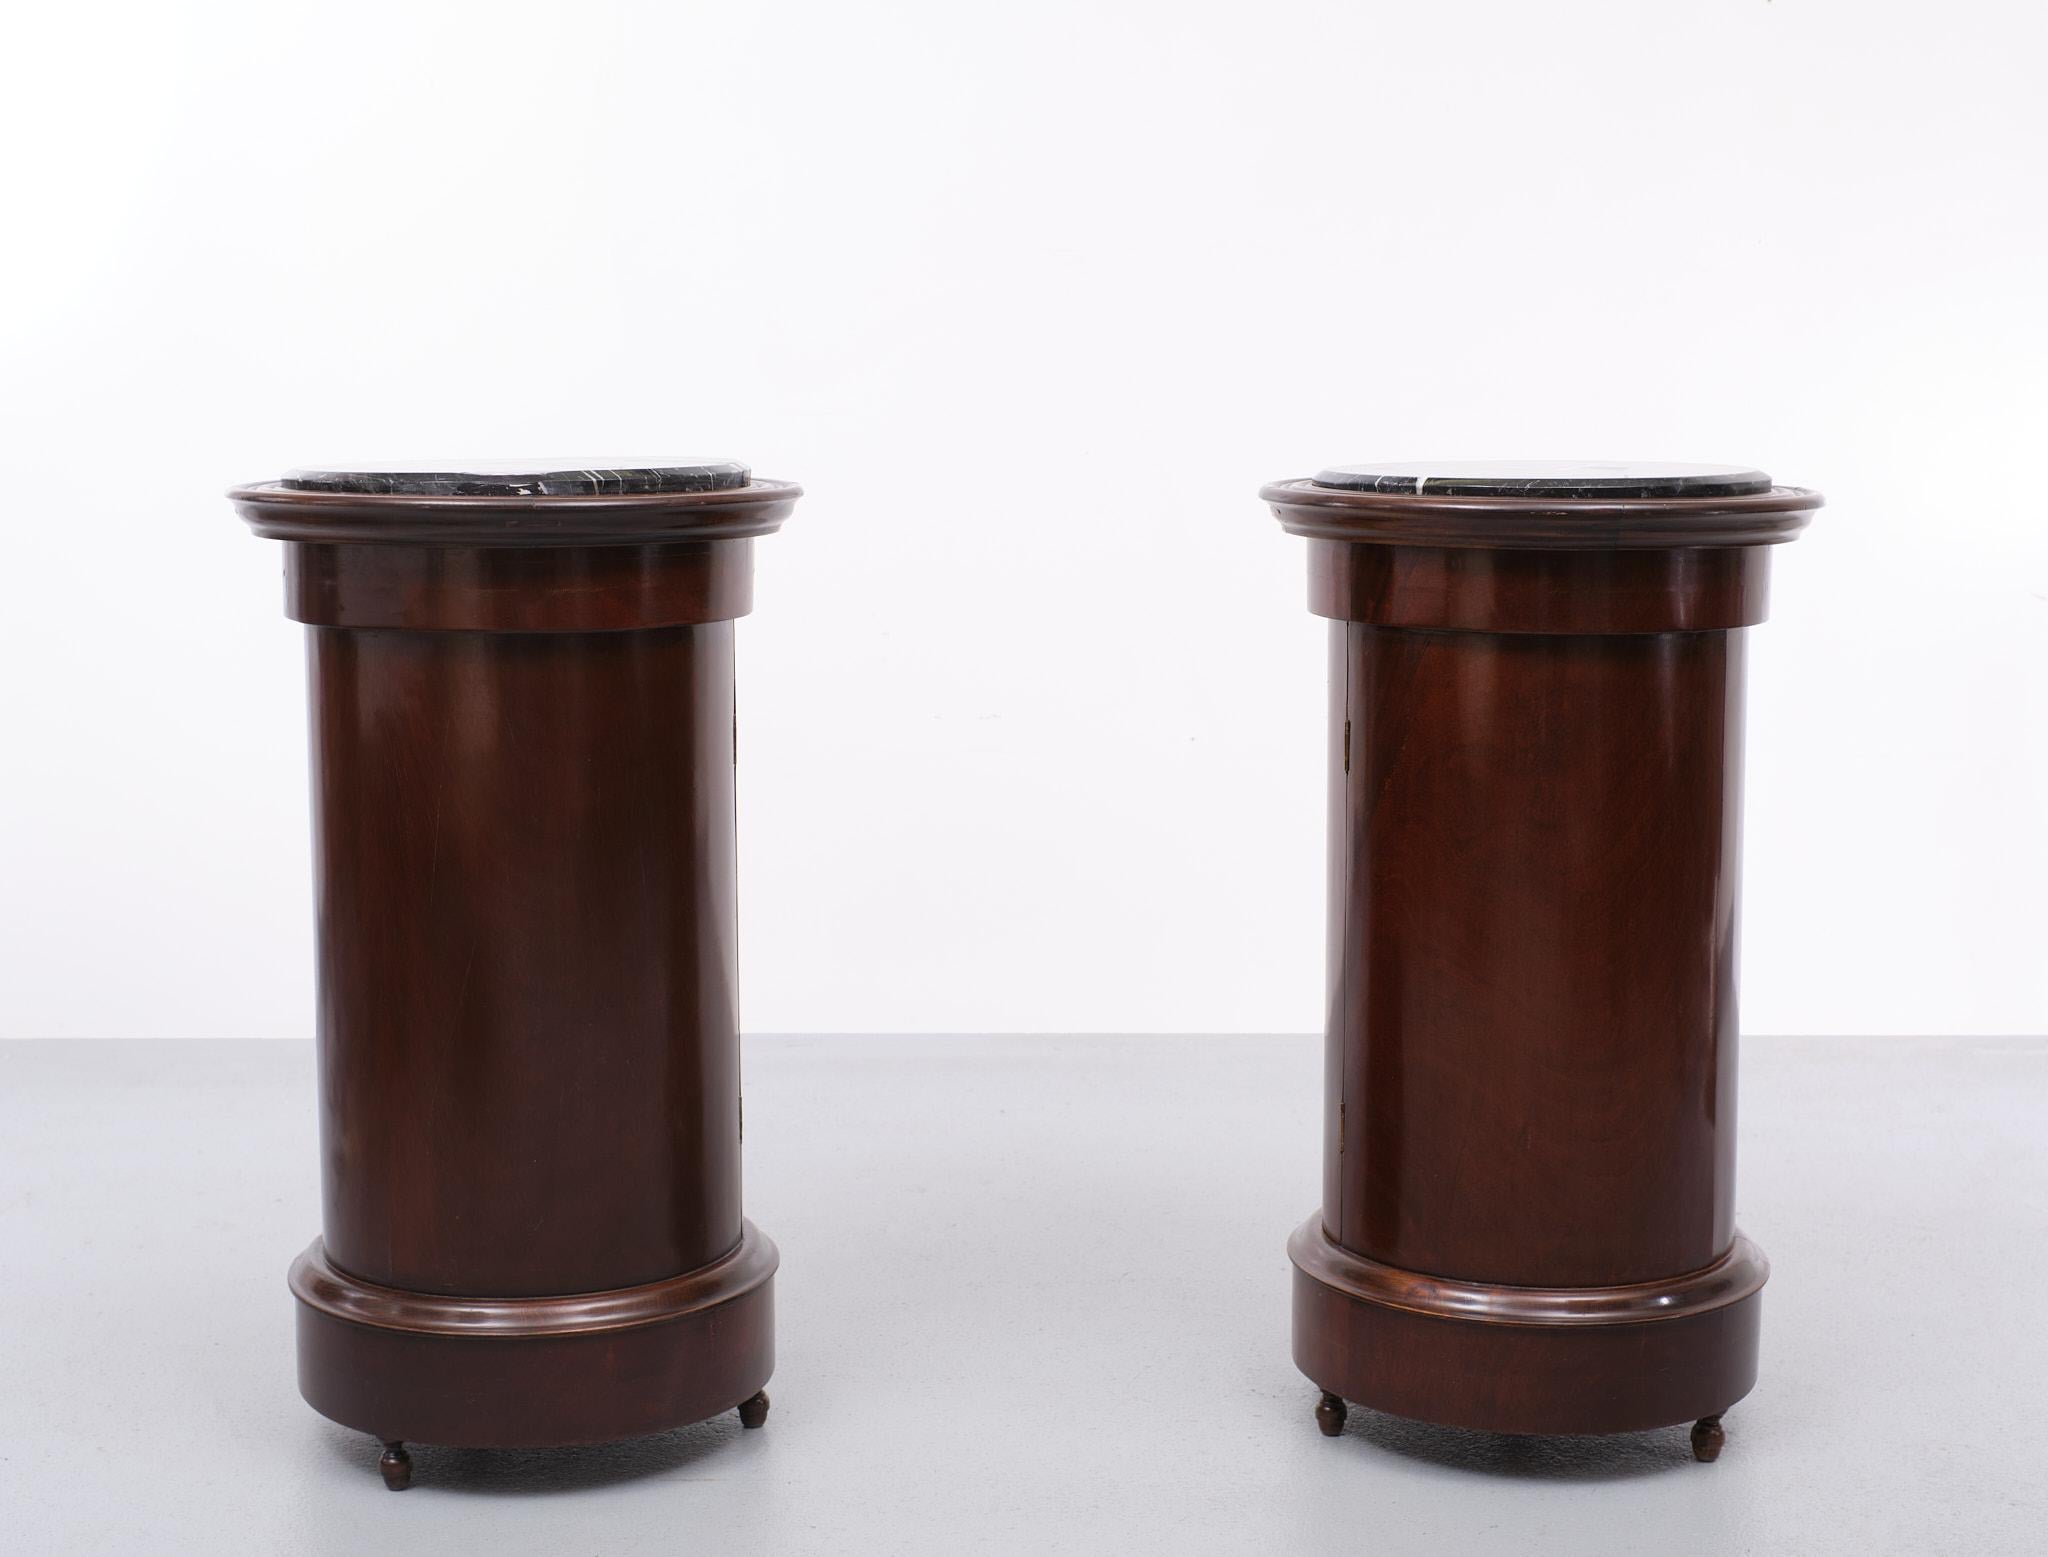 Set of Antique Cylindrical Nightstands 1880s England  For Sale 4